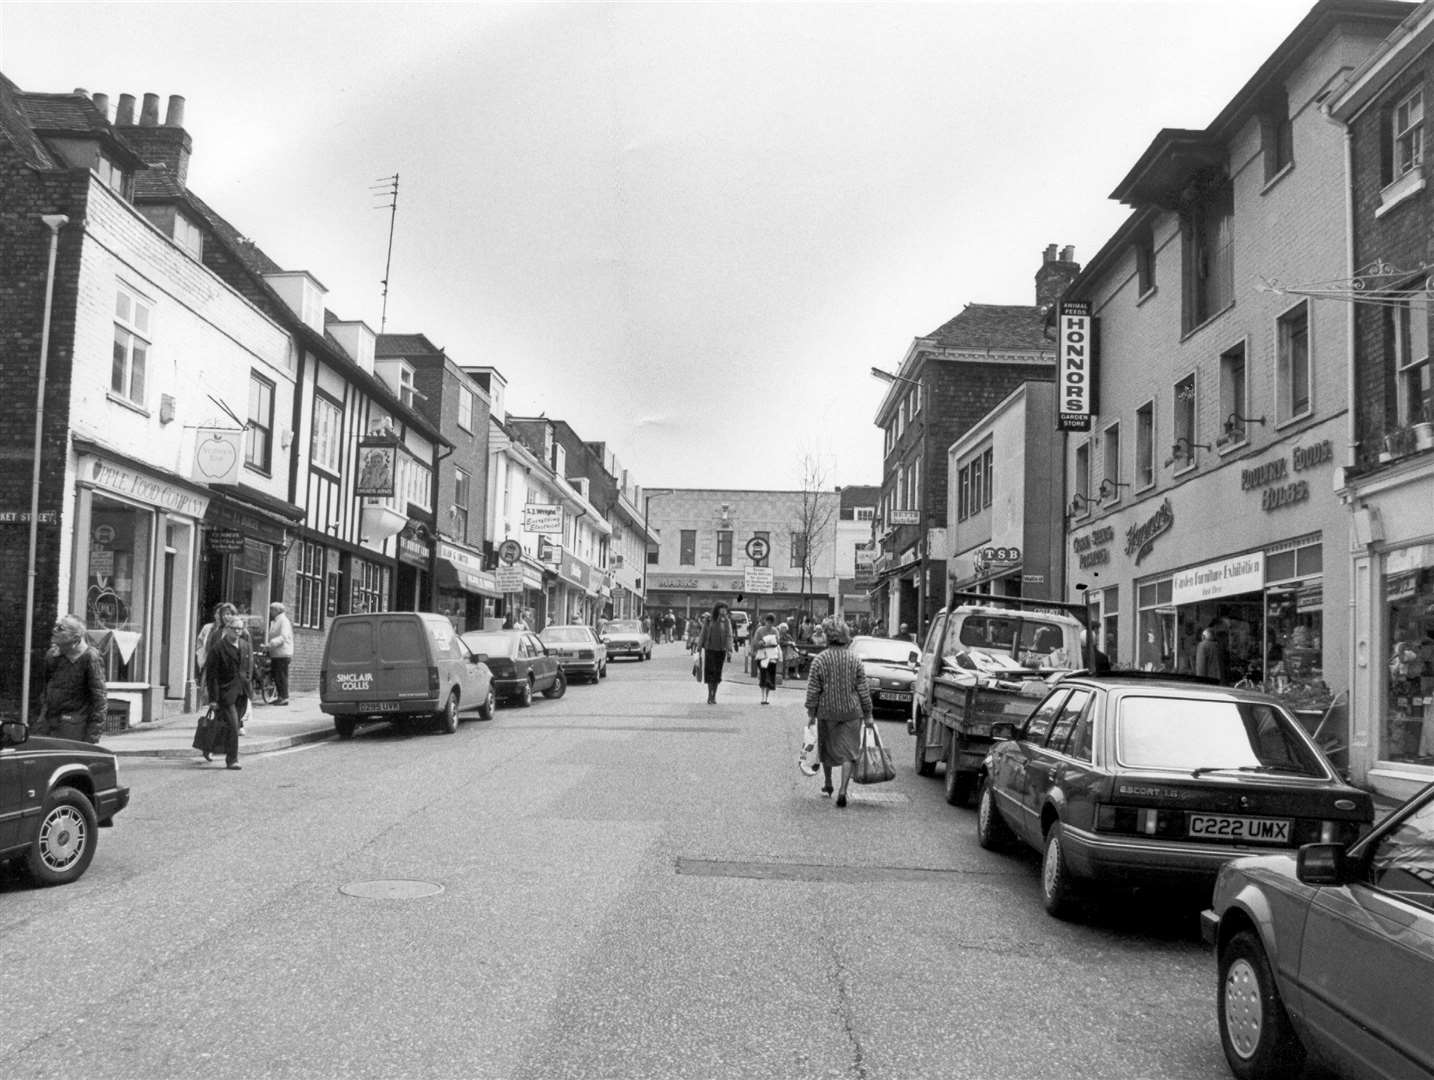 F J Burger is the second nearest shop on the left in this 1988 image of Earl Street, Maidstone